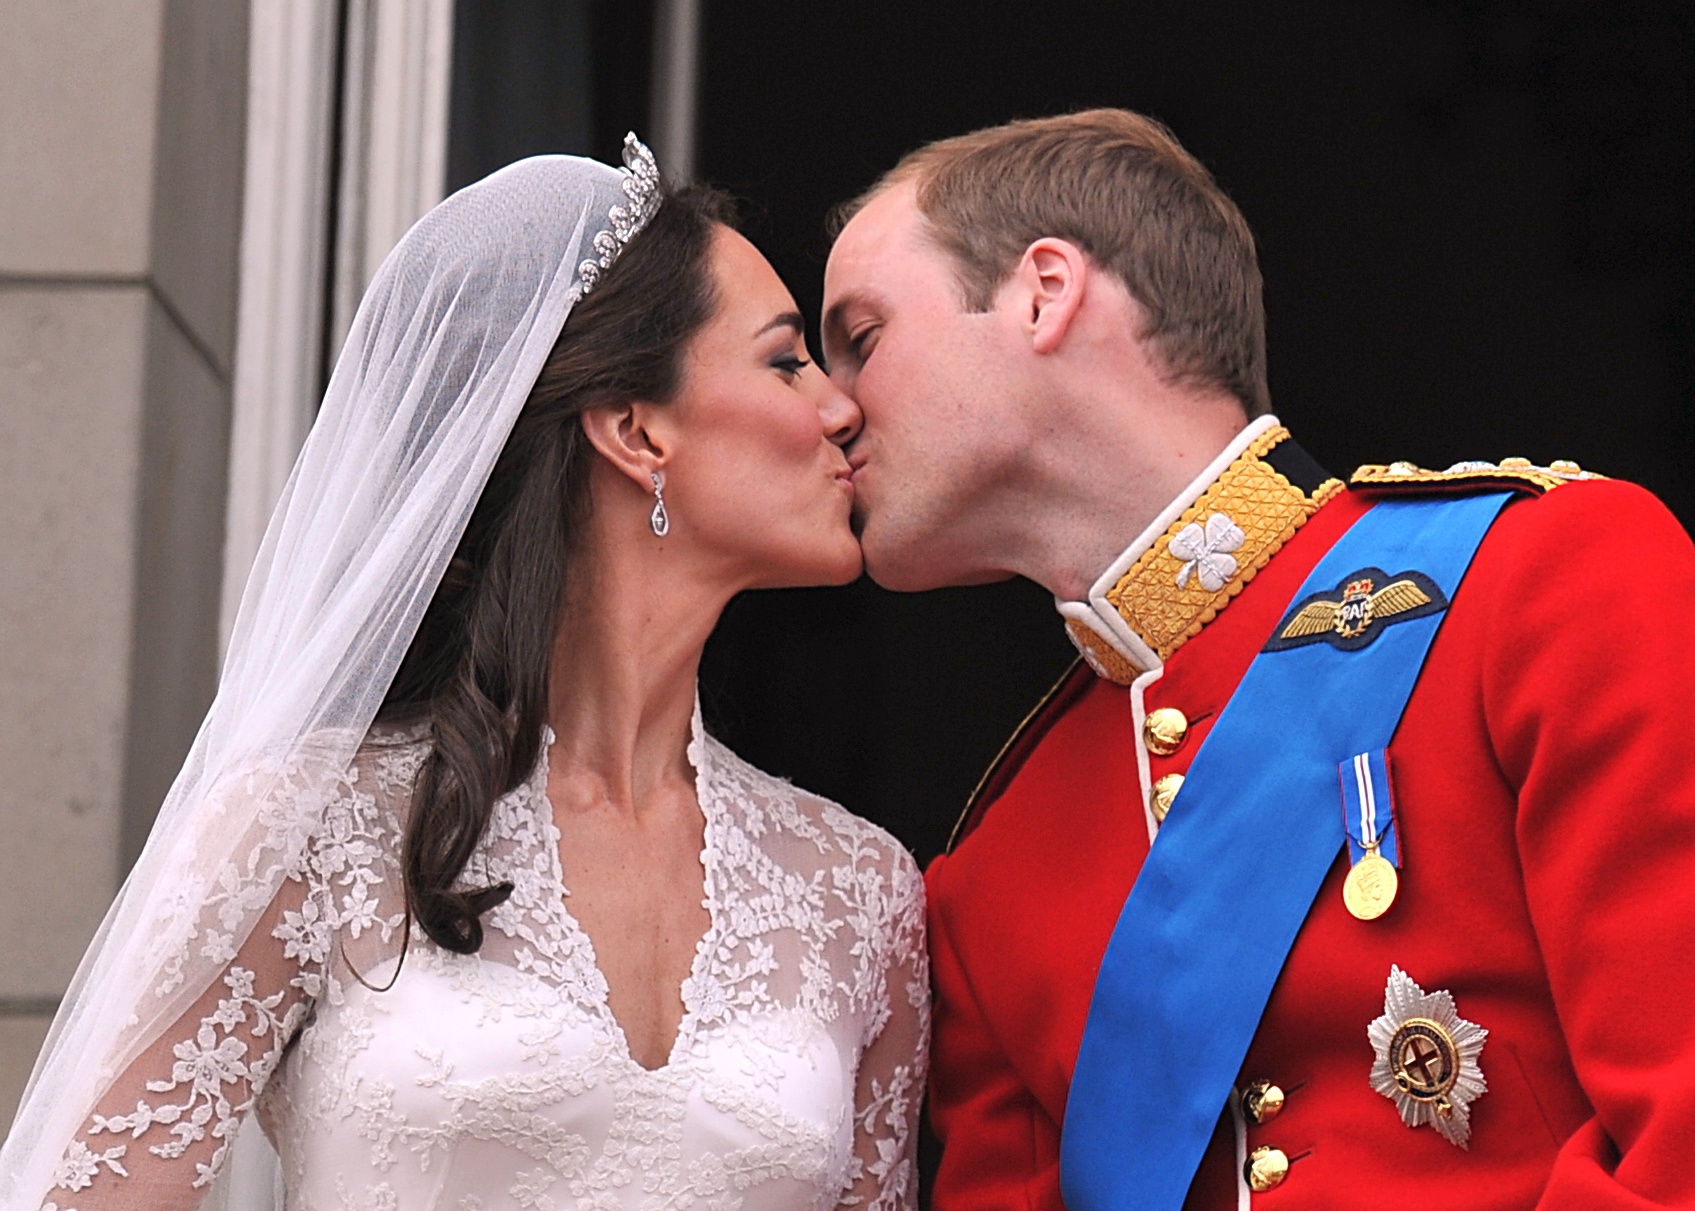 LONDON, ENGLAND - APRIL 29: Their Royal Highnesses Prince William, Duke of Cambridge and Catherine, Duchess of Cambridge kiss on the balcony at Buckingham Palace during the Royal Wedding of Prince William to Catherine Middleton on April 29, 2011 in London, England. The marriage of the second in line to the British throne was led by the Archbishop of Canterbury and was attended by 1900 guests, including foreign Royal family members and heads of state. Thousands of well-wishers from around the world have also flocked to London to witness the spectacle and pageantry of the Royal Wedding. 